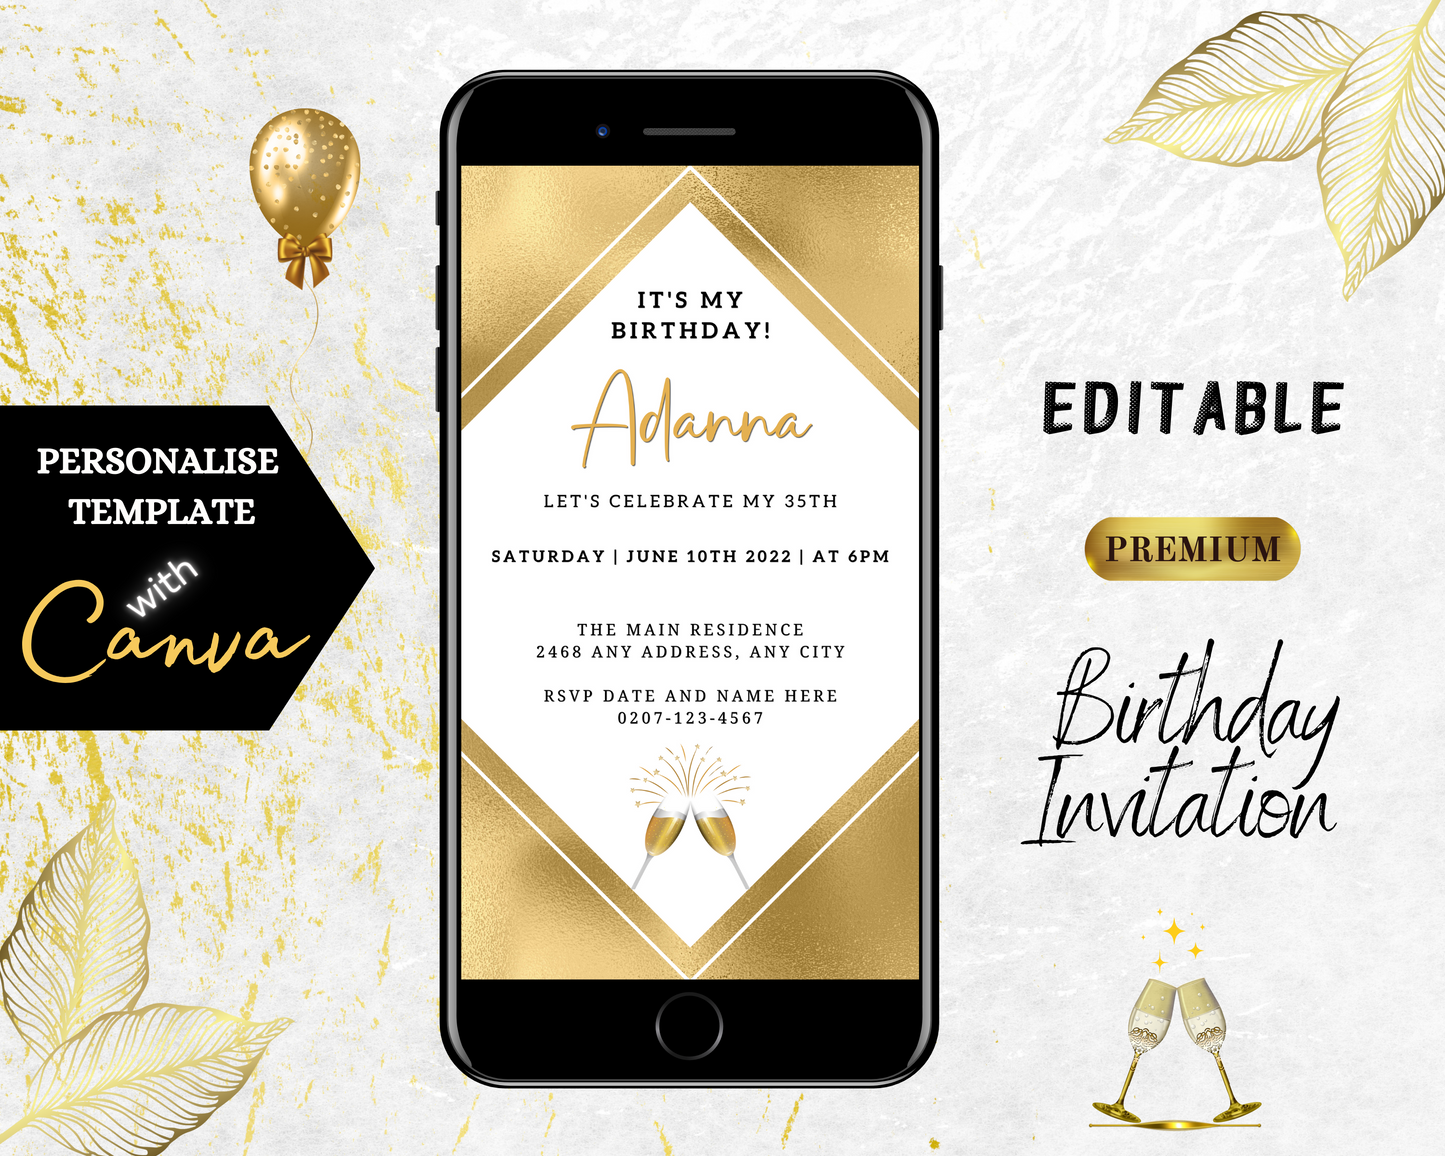 Gold and white smartphone displaying a customizable digital birthday party invitation template with champagne theme elements.